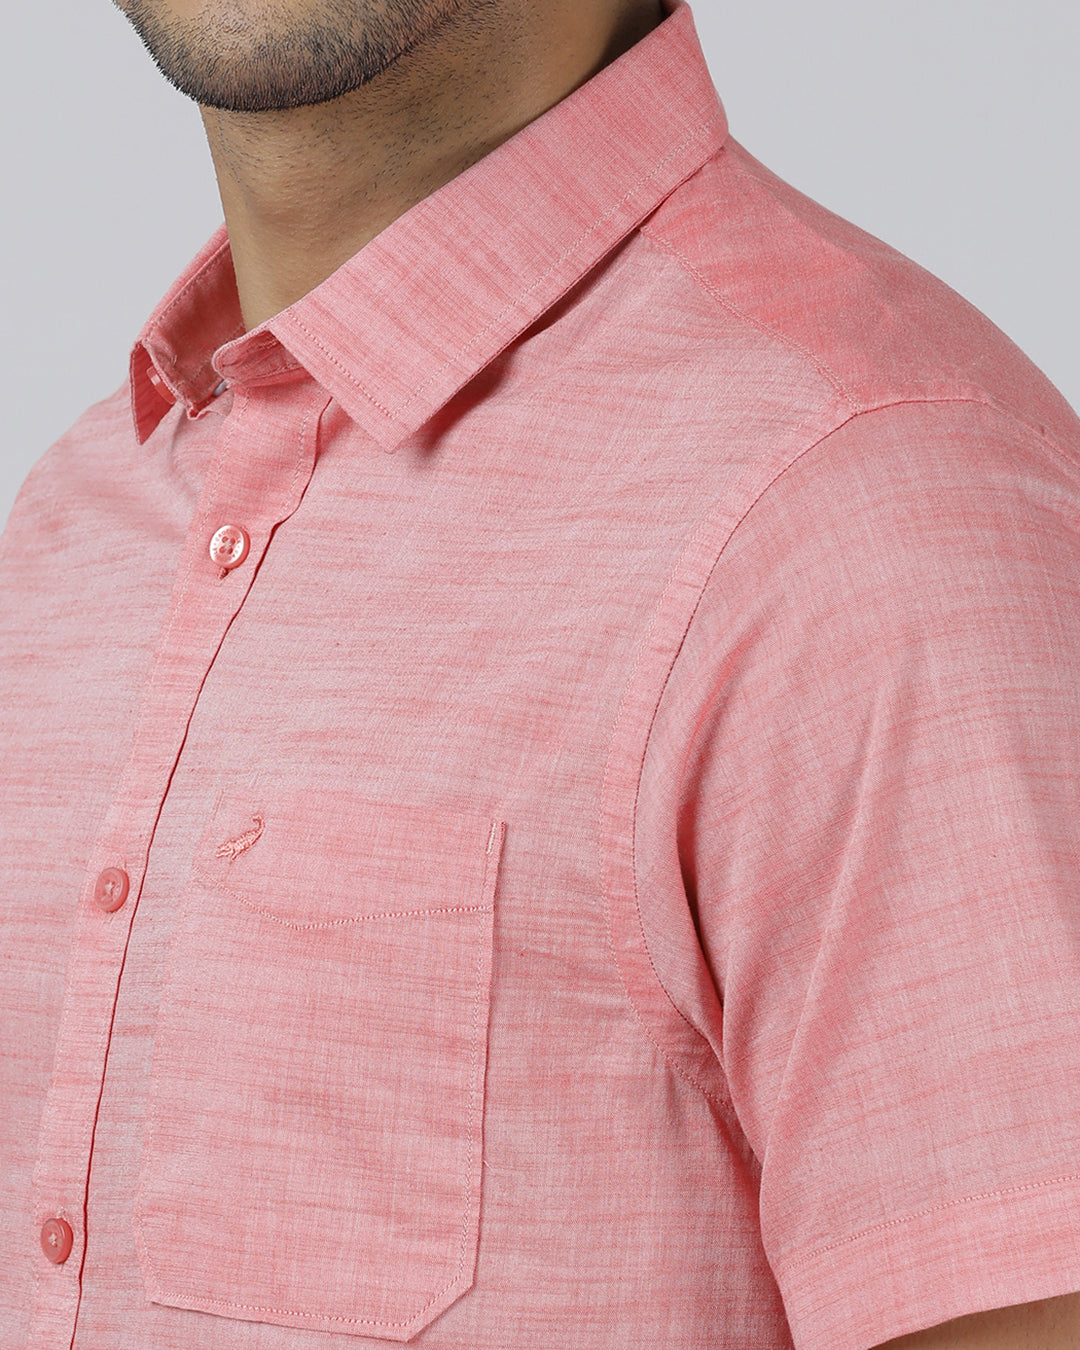 Casual Pink Half Sleeve Regular Fit Solid Shirt with Collar for Men